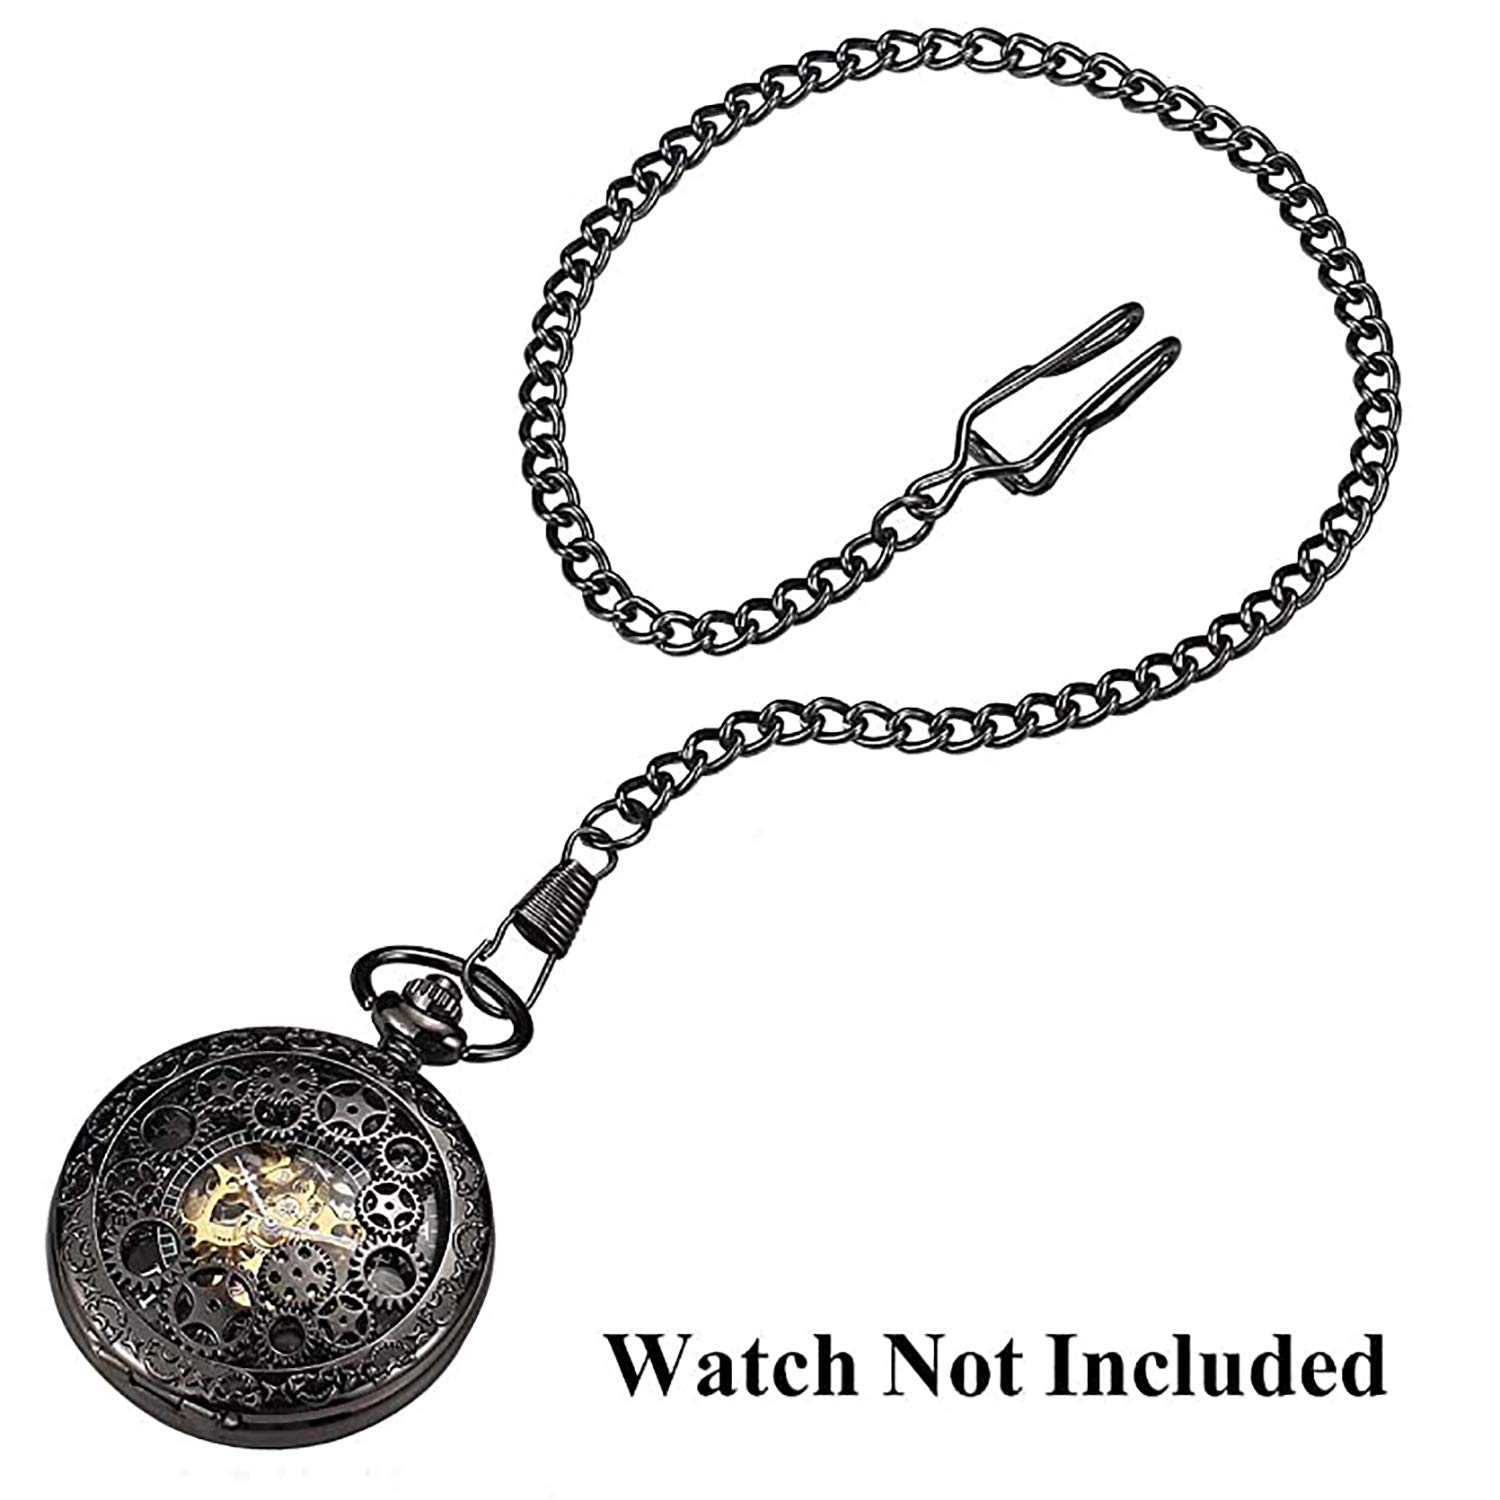 Clip Pocket Watch Chain Watch Vintage Metal Alloy Chain Accessory for Your Pocket Watch (Black/Silver/Bronze/Gold)